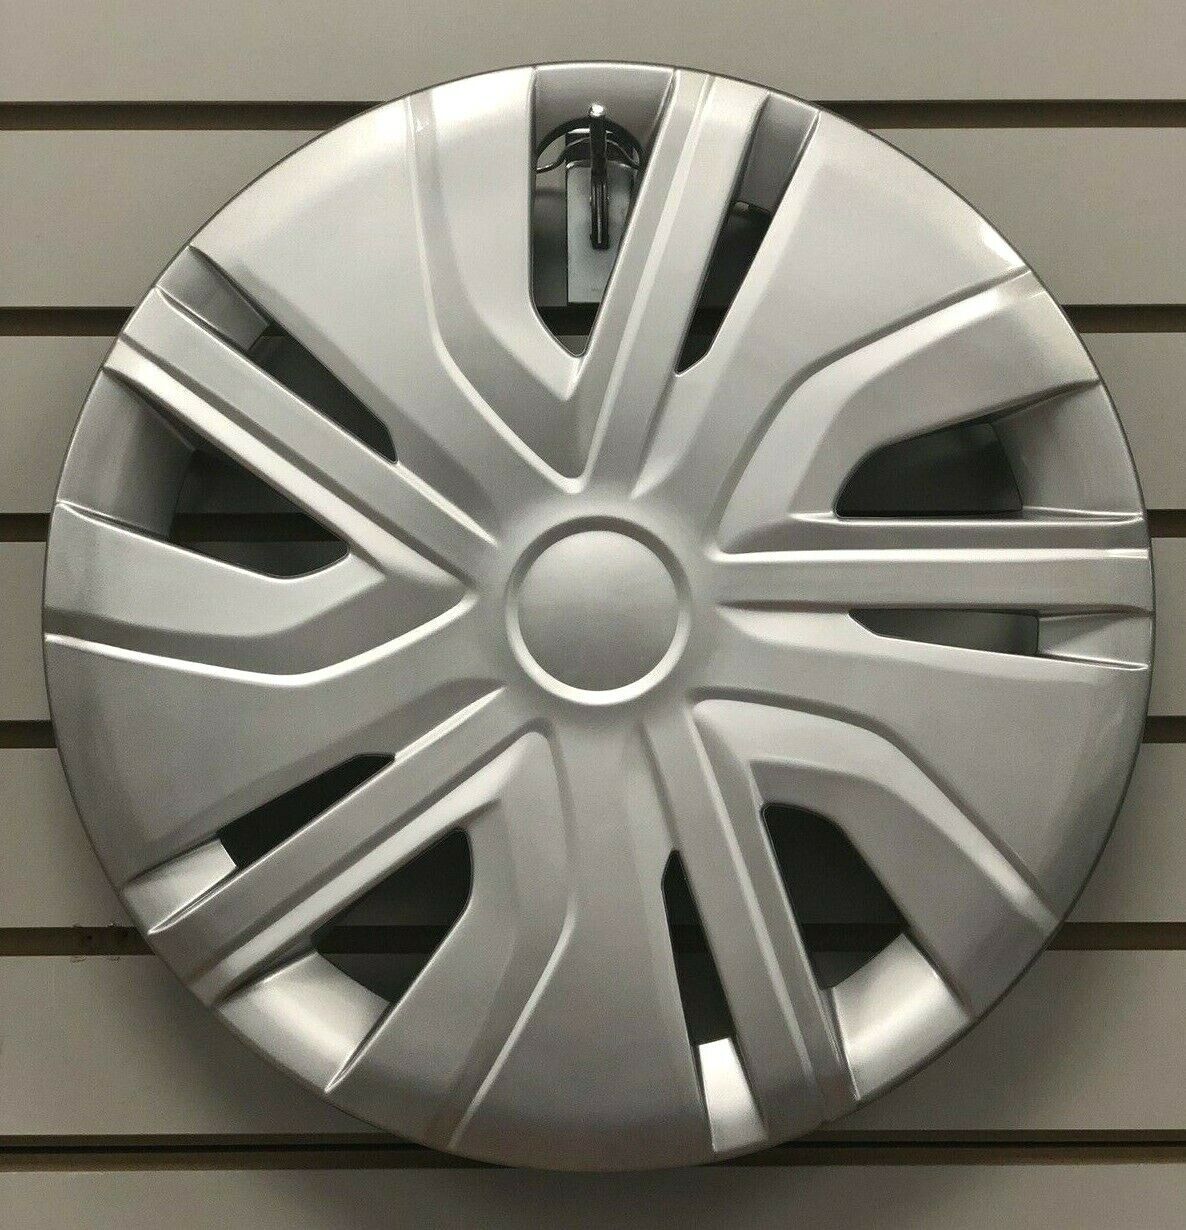 New 2017-2020 MITSUBISHI MIRAGE Silver 14” Hubcap Wheelcover